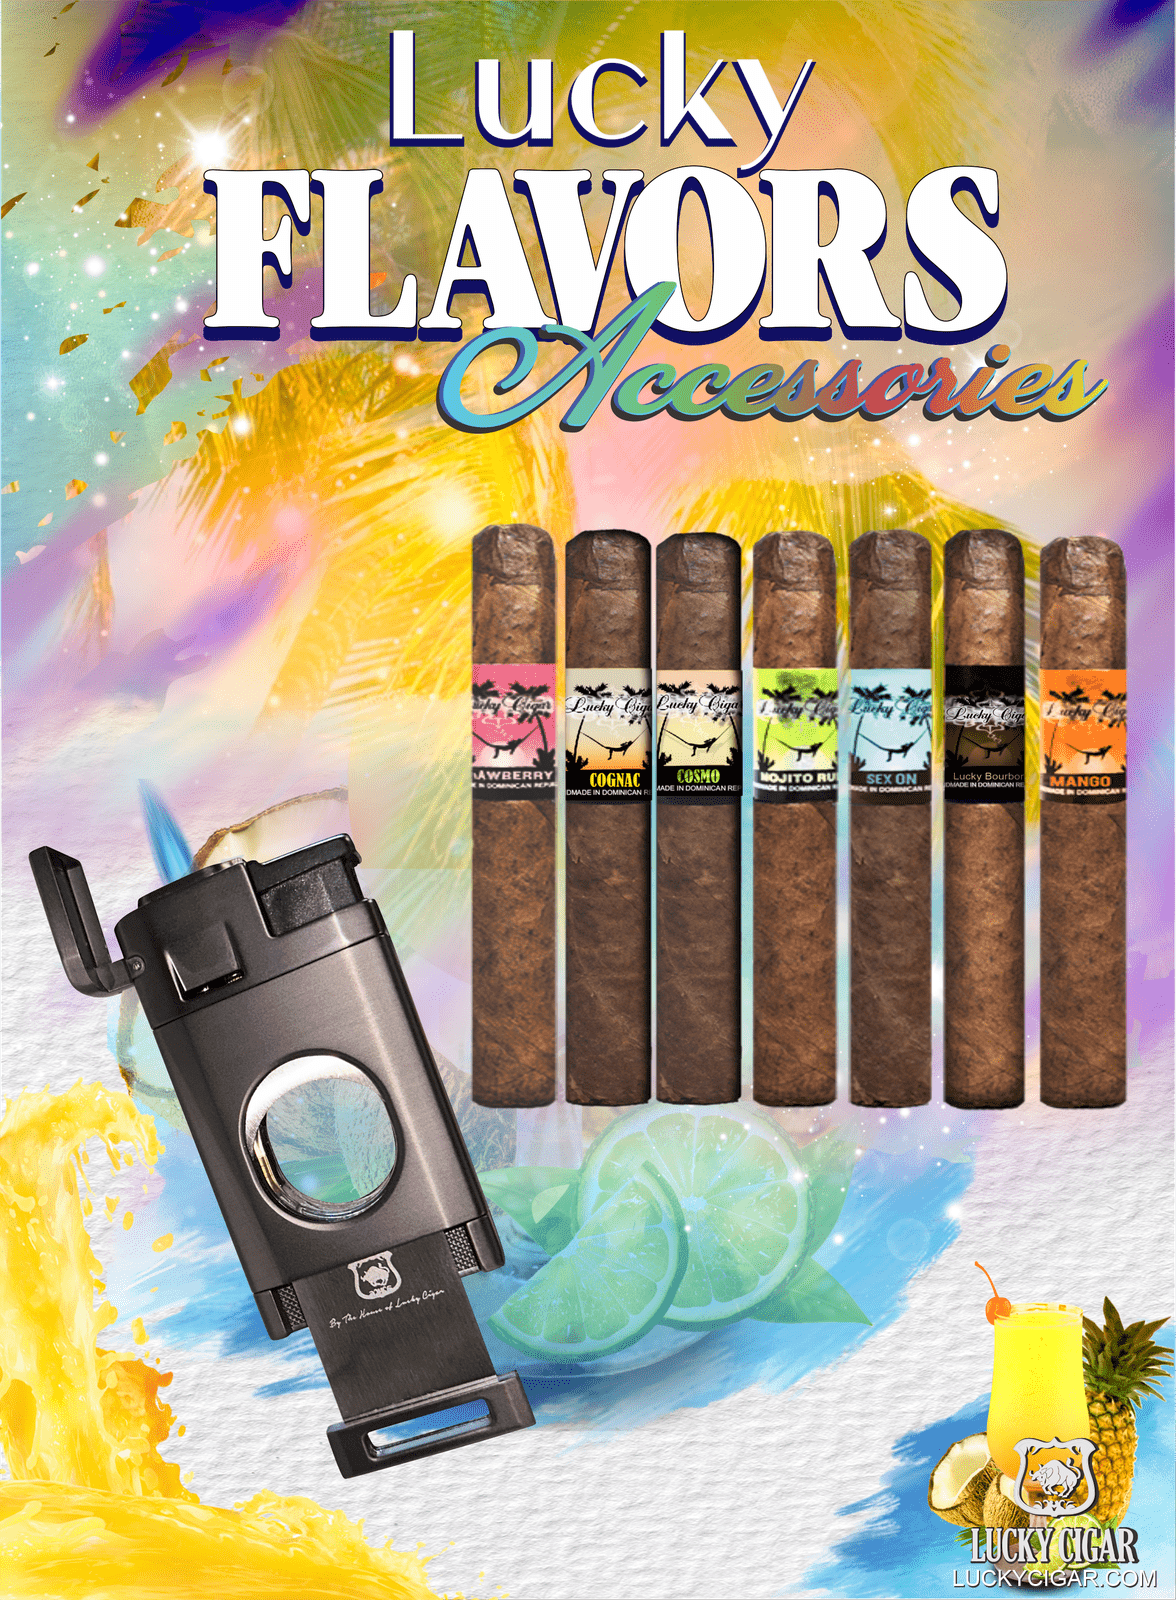 Flavored Cigars: Lucky Flavors 7 Cigar Set with Torch Cutter Combo